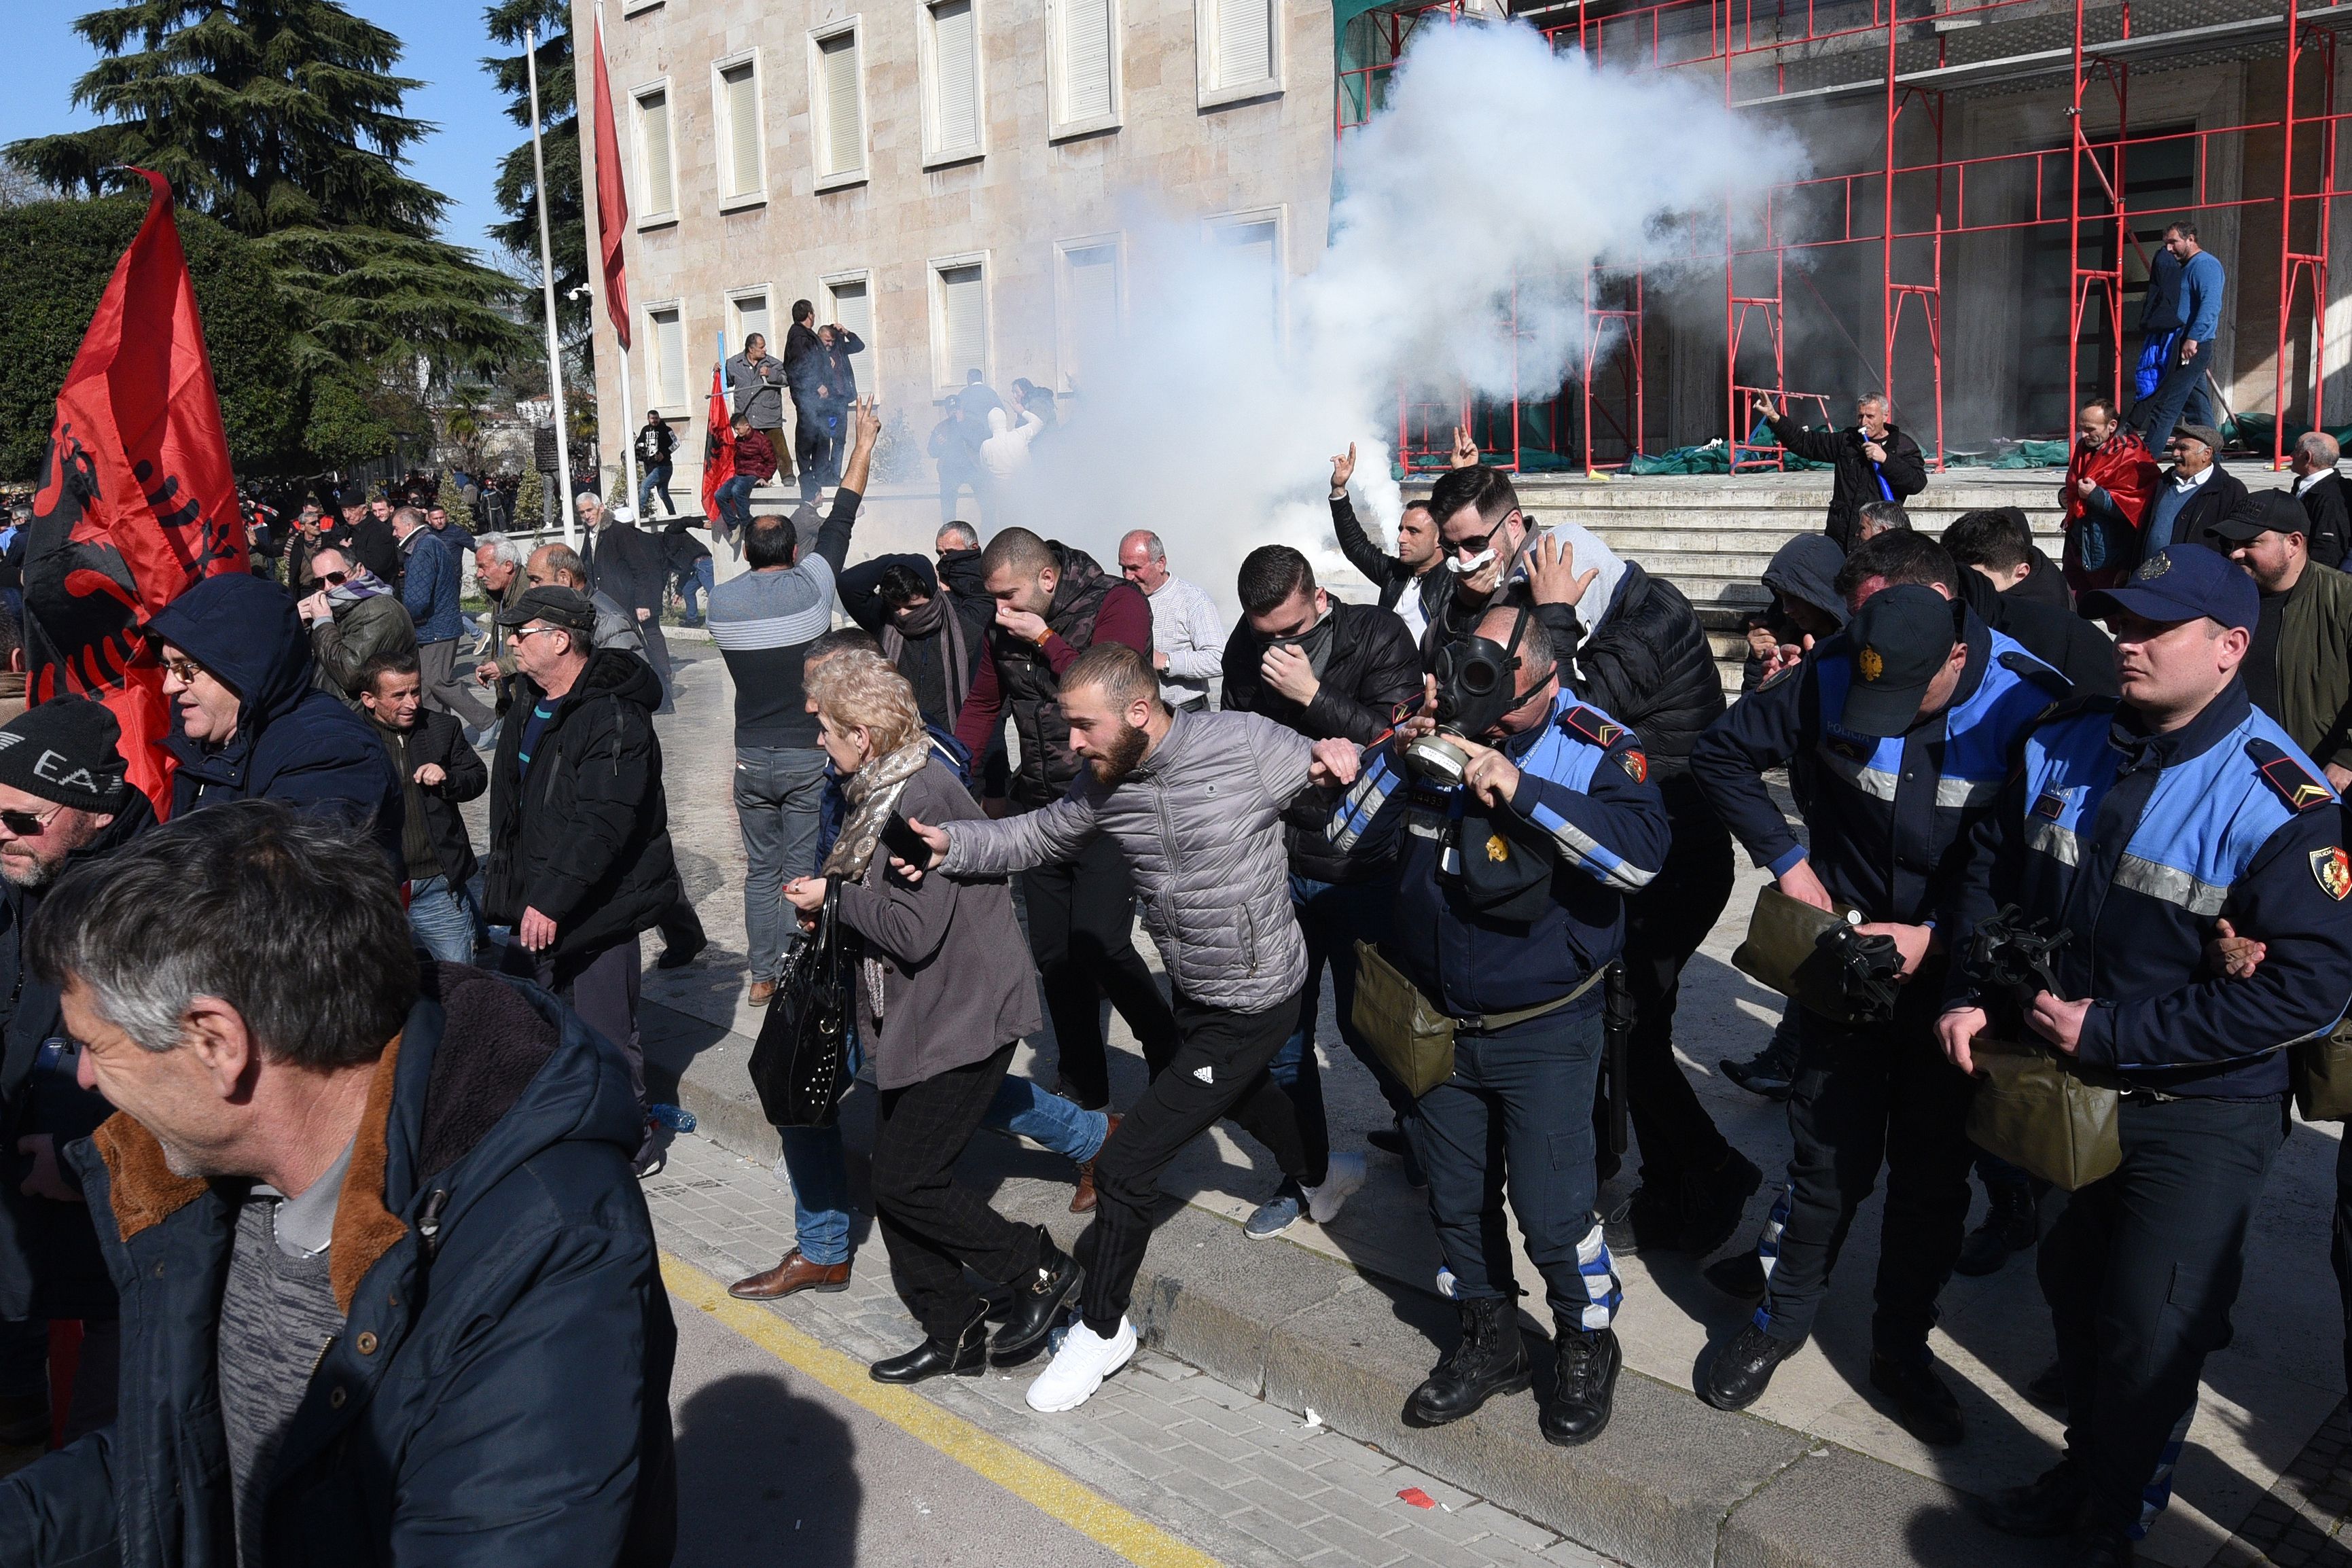 Protestors run from tear gas in Tirana, Albania during February protests calling for the resignation of the prime minister over corruption allegations.